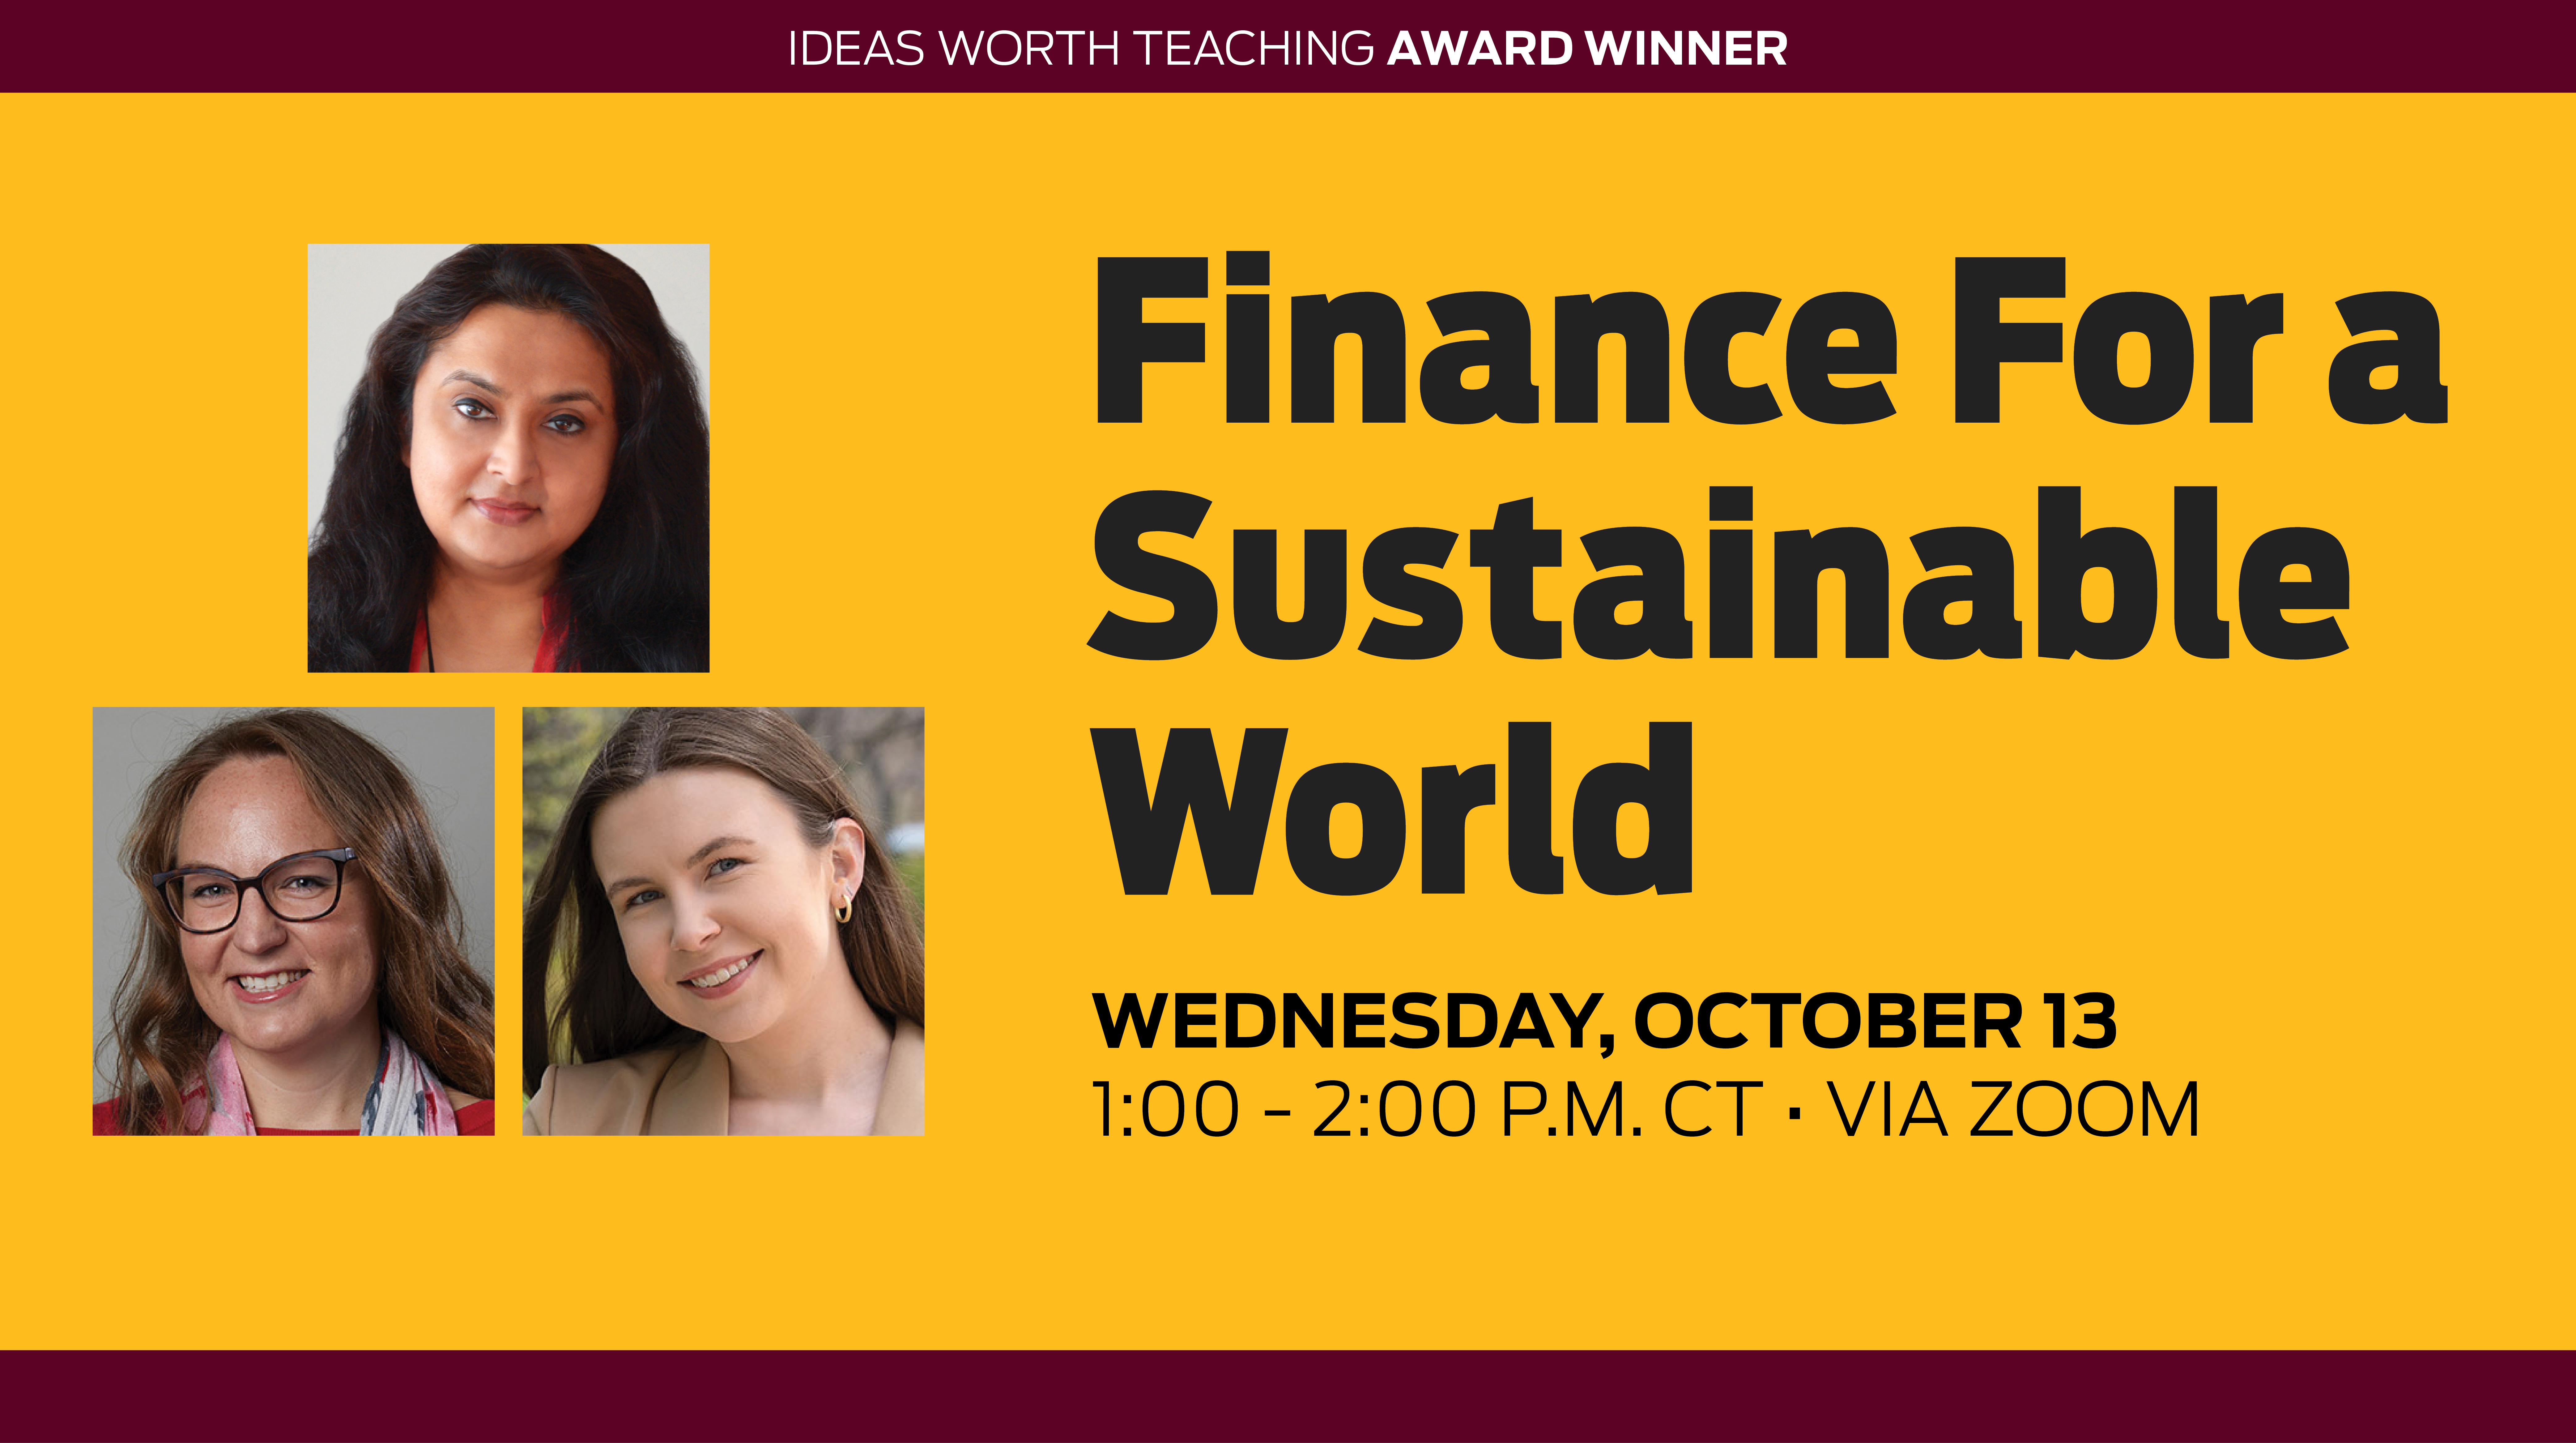 Ideas Worth Teaching: Finance for a Sustainable World